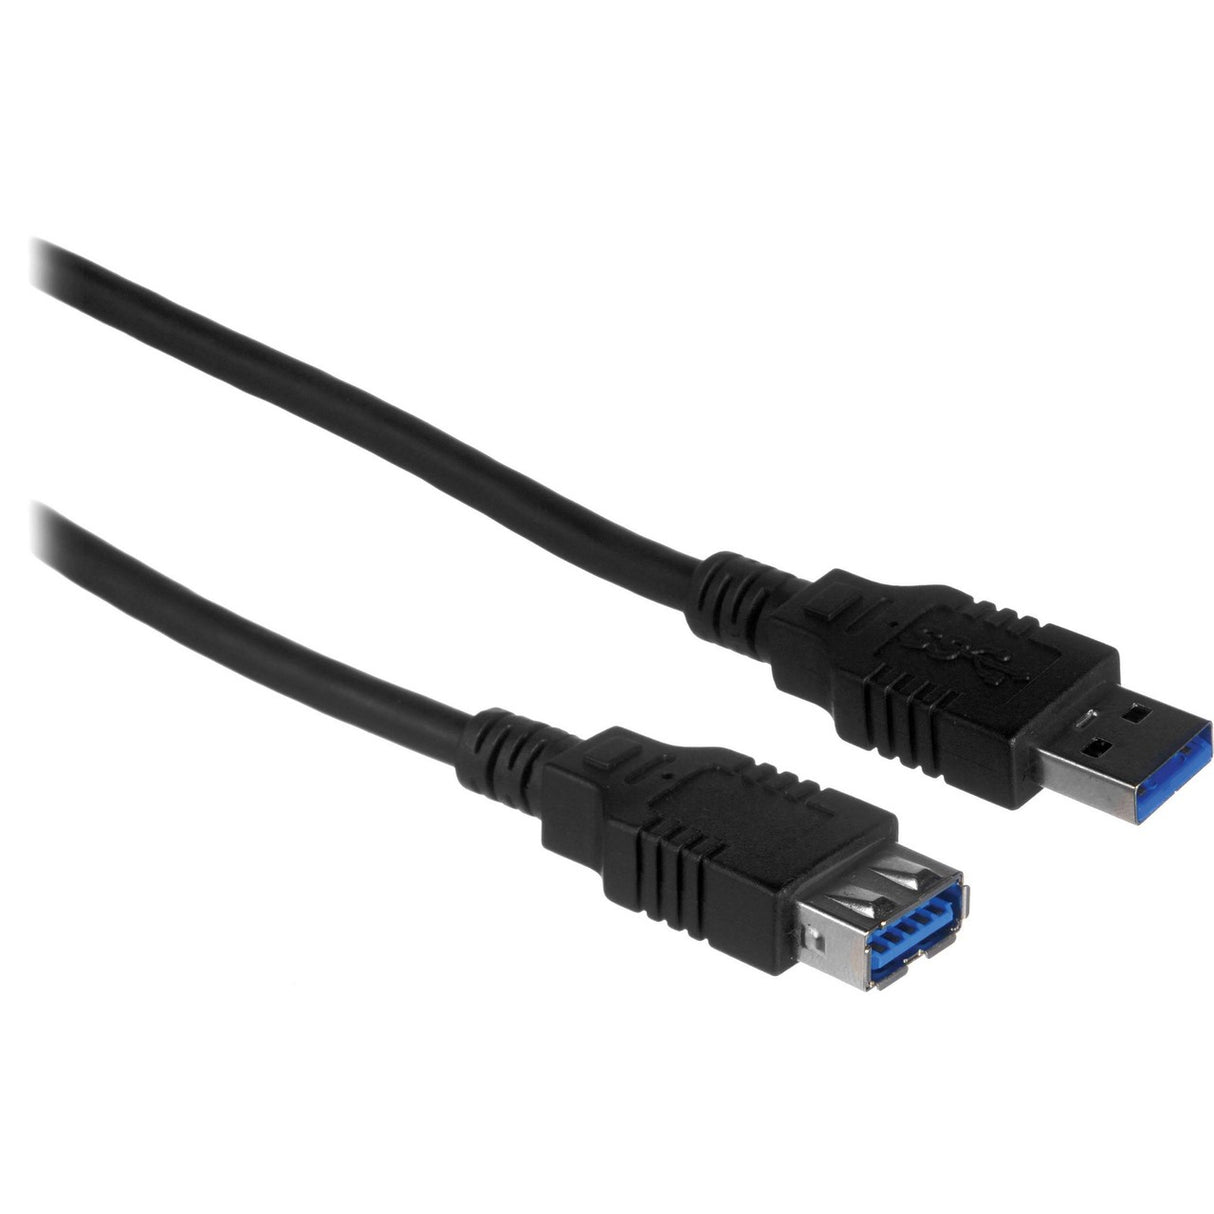 Pearstone USB3-AA3 3 Foot USB 3.0 Type A Male to Type A Female Extension Cable